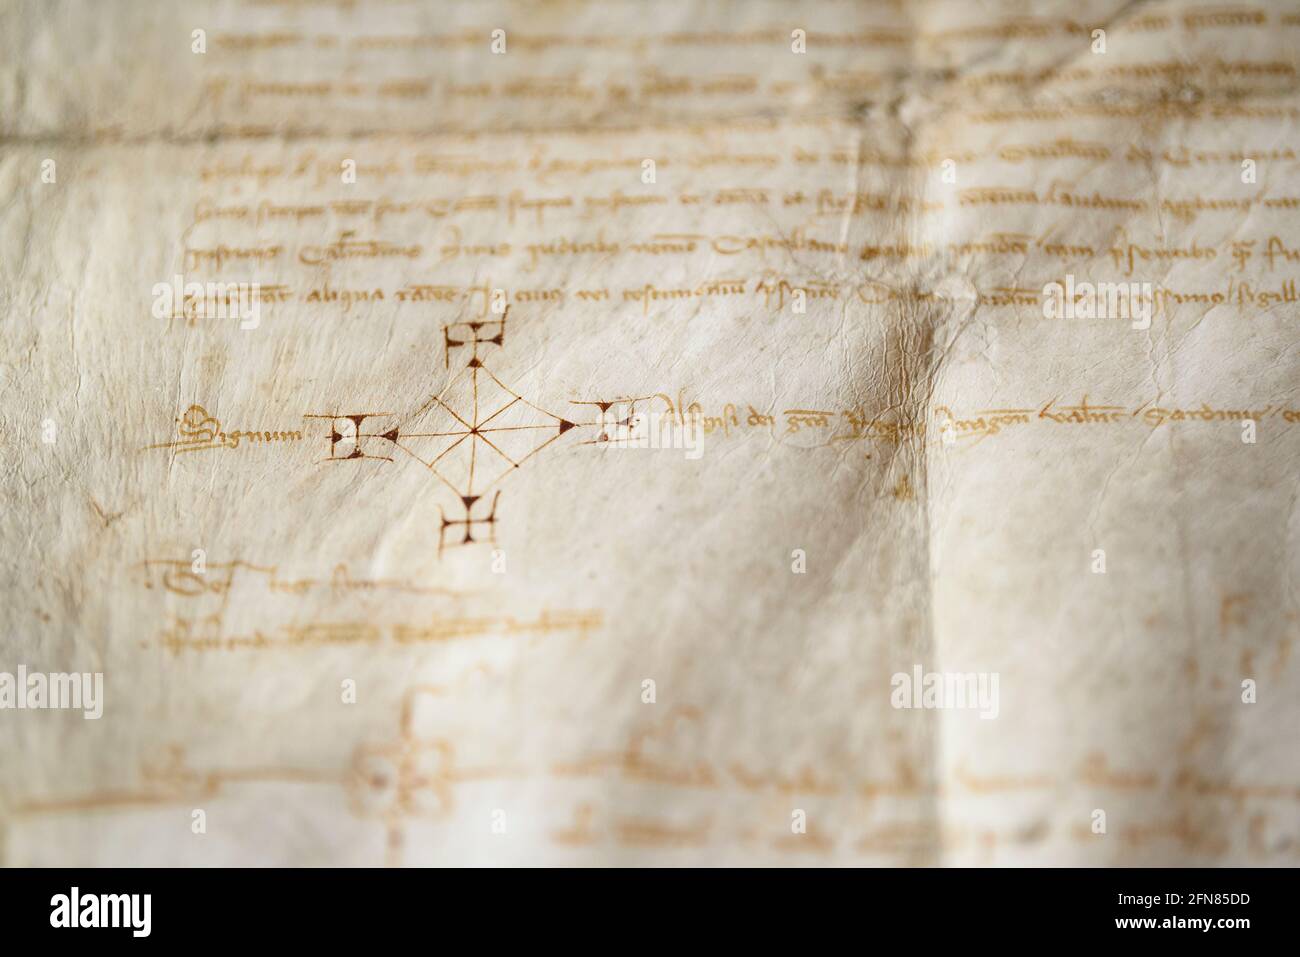 Original historical document of Era Querimònia, which grants the historical rights of the Aran Valley. It is kept in the Archiu Istoric Generau d'Aran Stock Photo